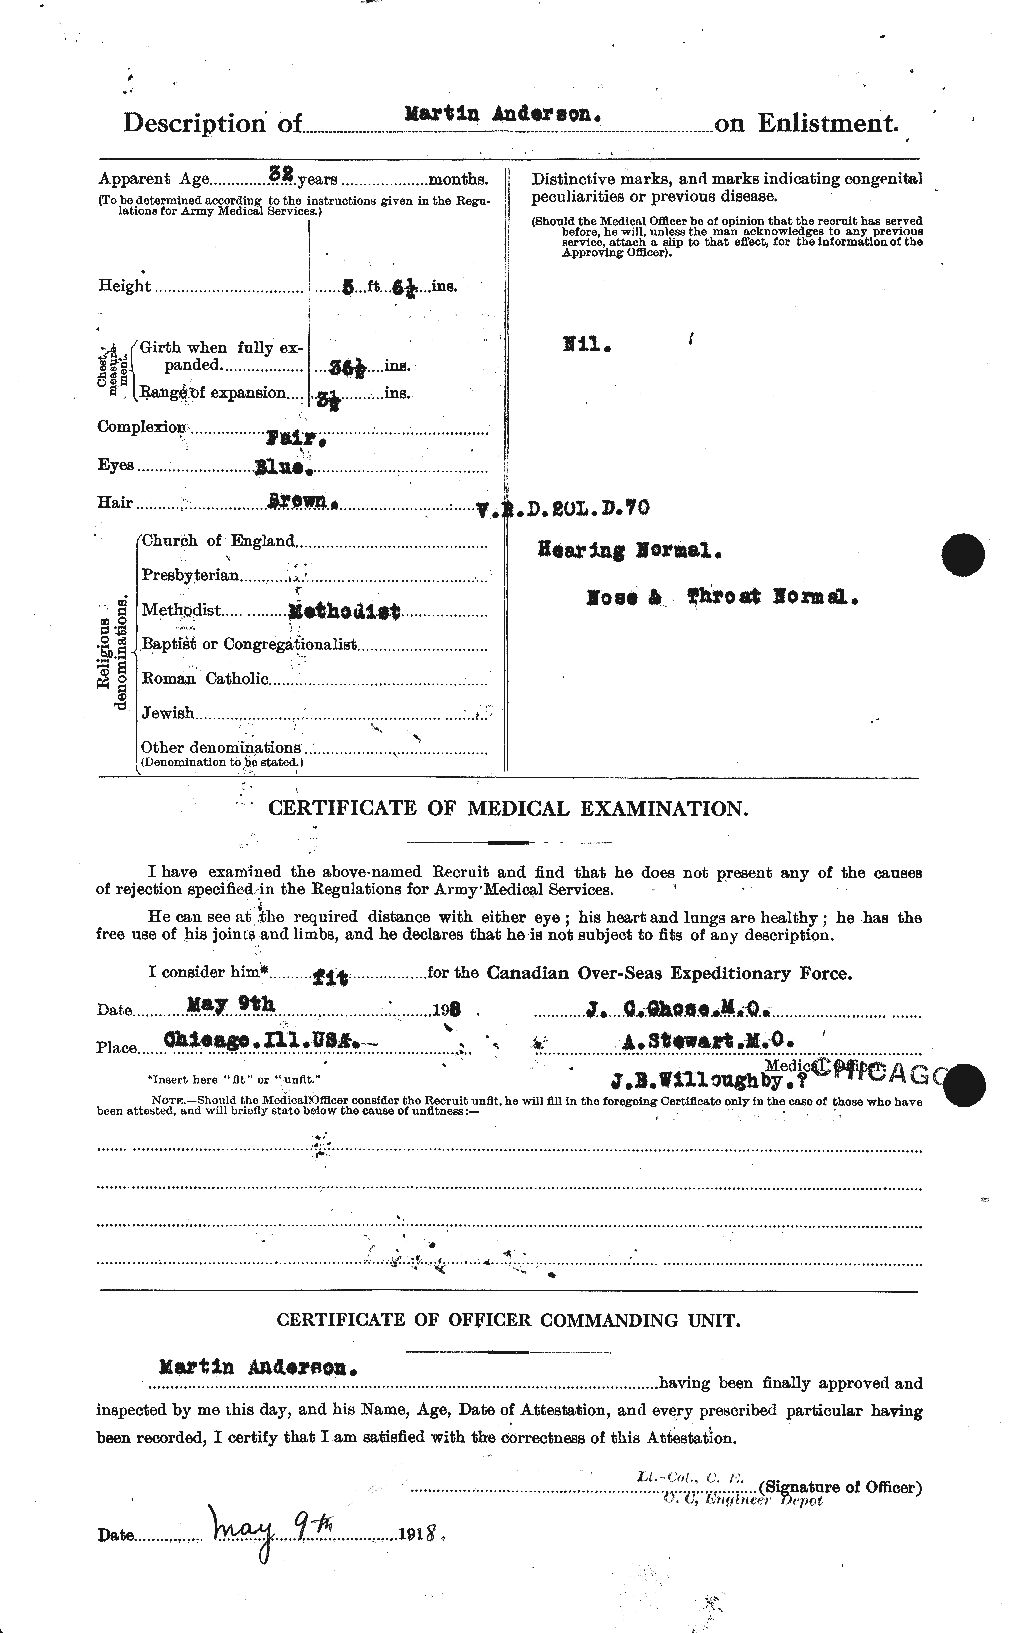 Personnel Records of the First World War - CEF 207476b